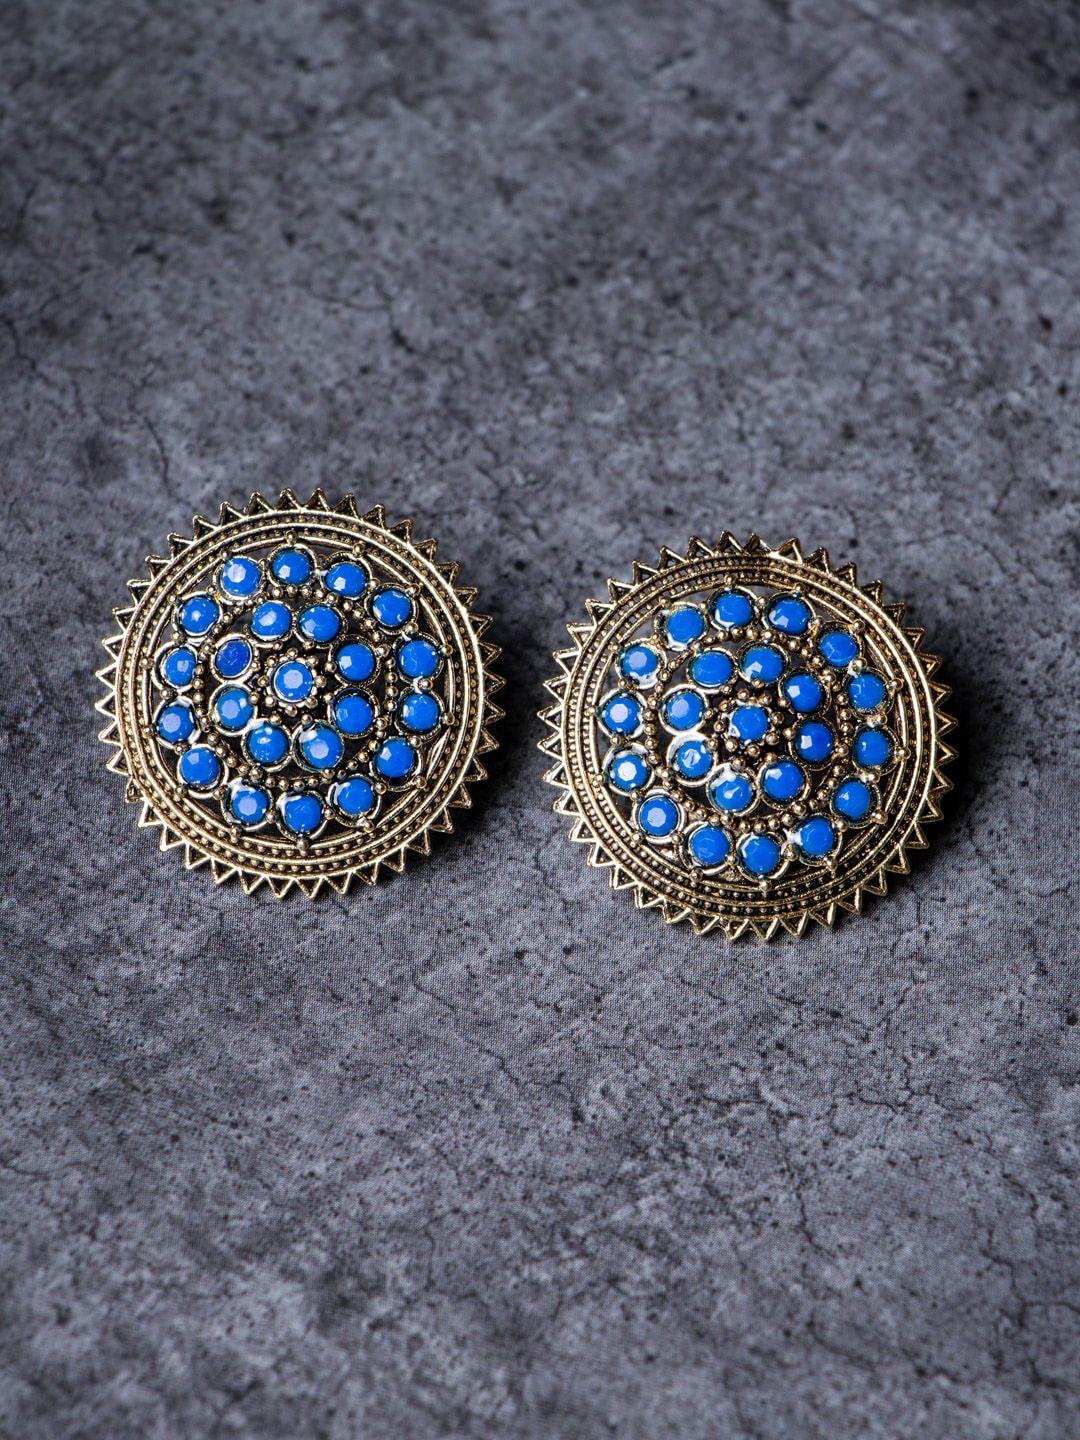 morkanth jewellery navy blue contemporary studs earrings